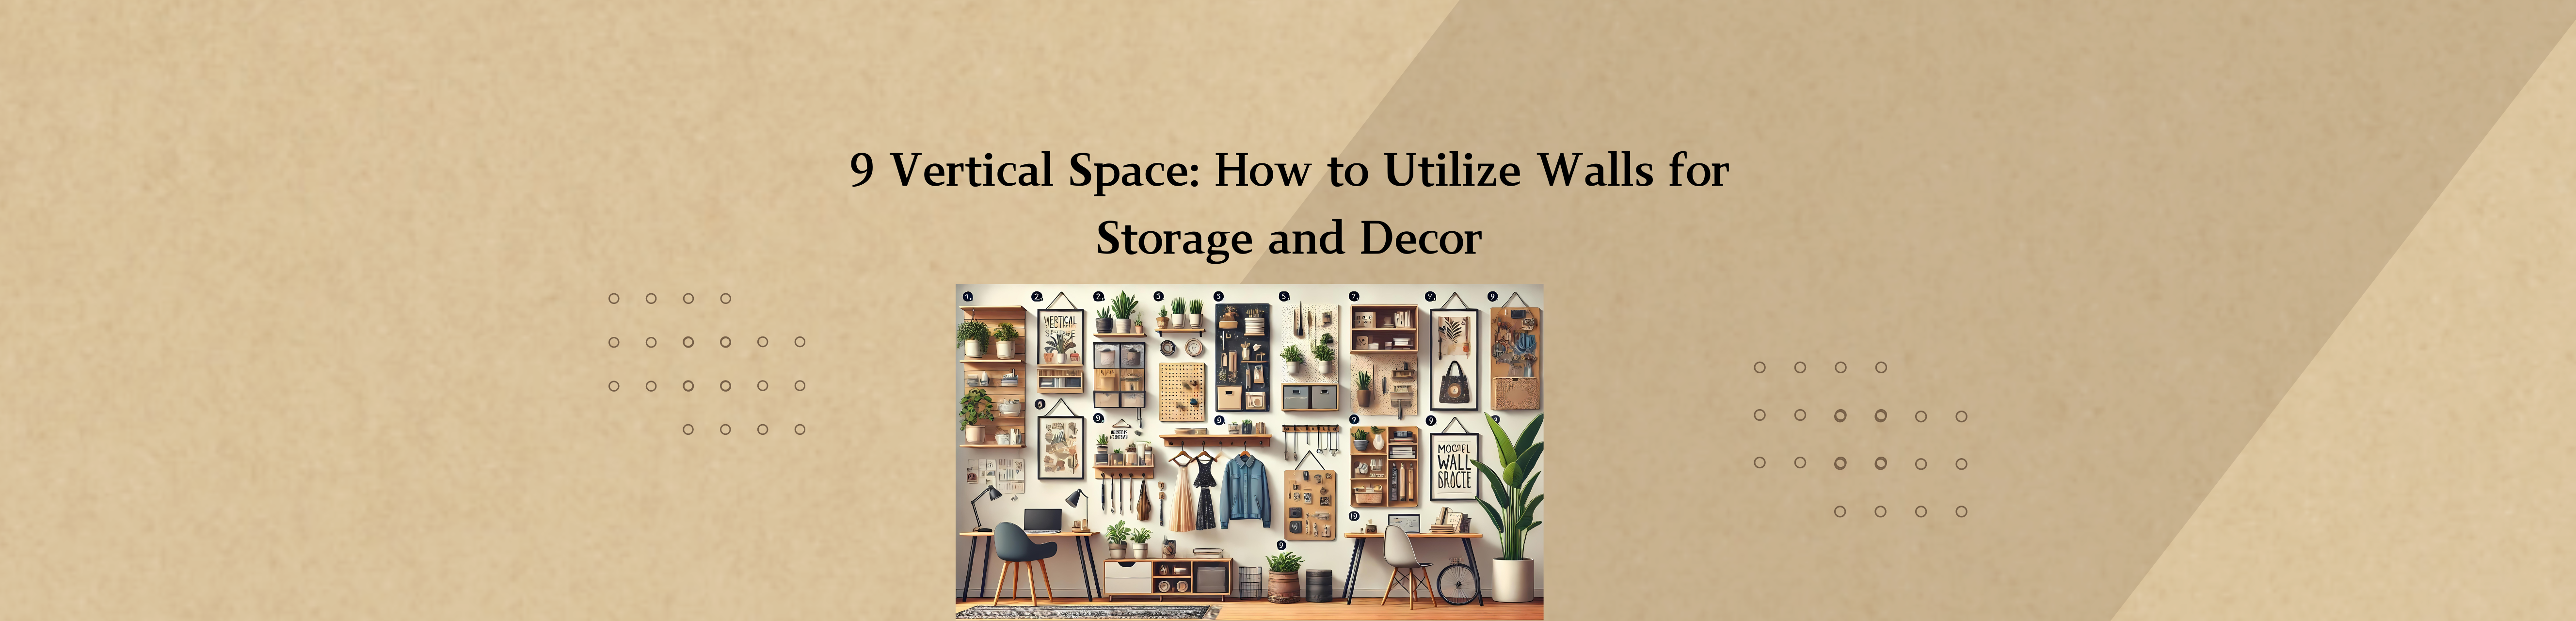 9 Creative Ways to Utilize Vertical Space: Transform Your Walls for Storage and Decor